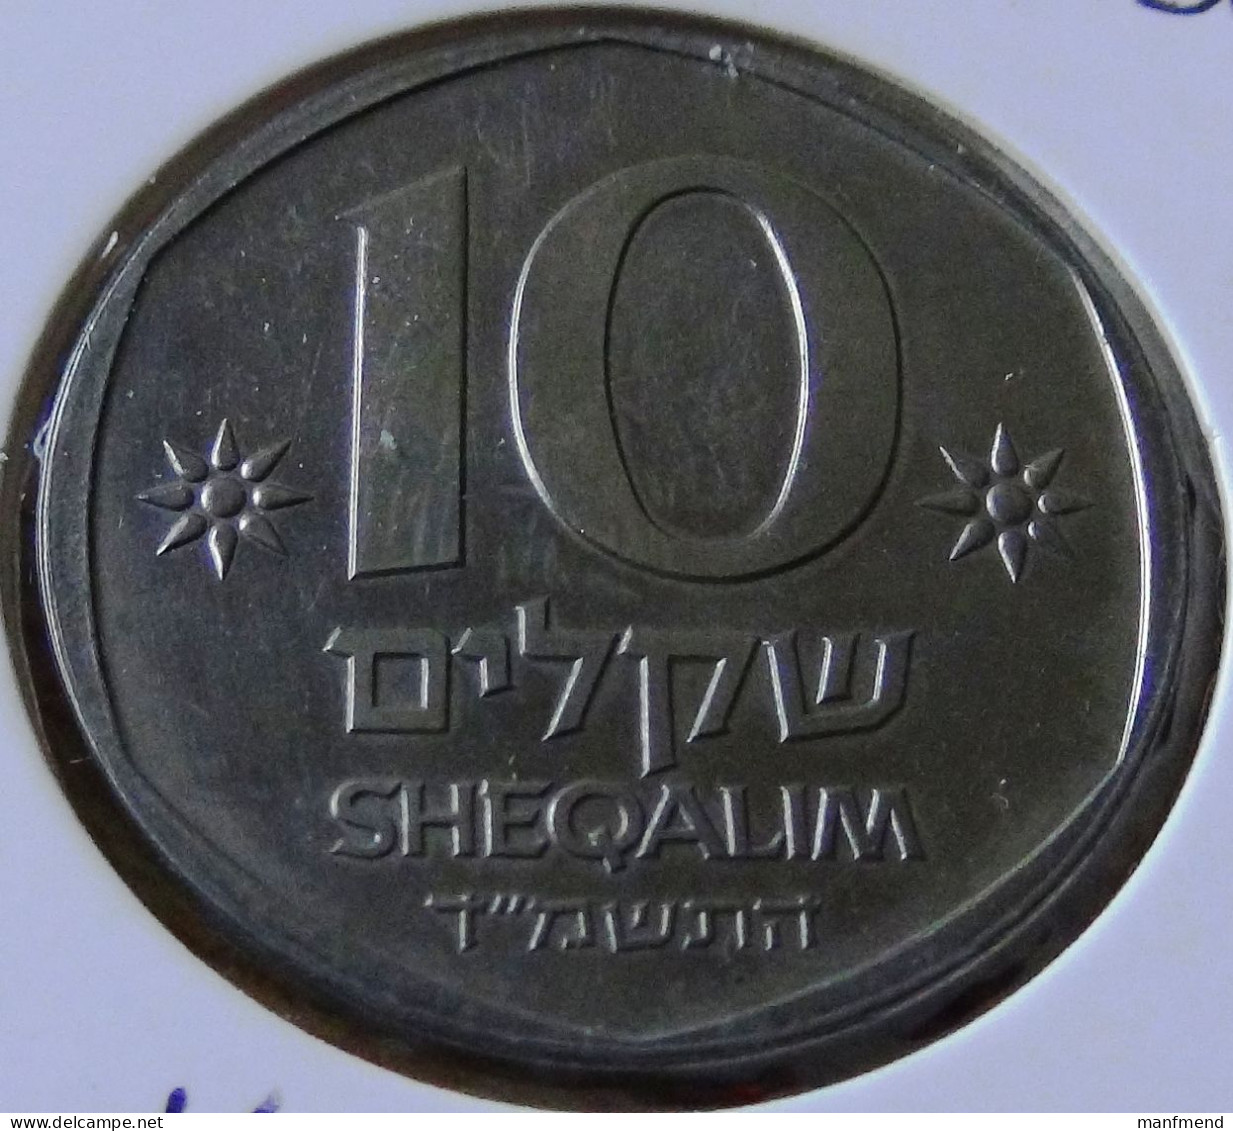 Israel - 1984 - KM 137 - 10 Sheqalim - Hungarian Zionism Father Theodor Herzl - Unc - Look Scans - Israel